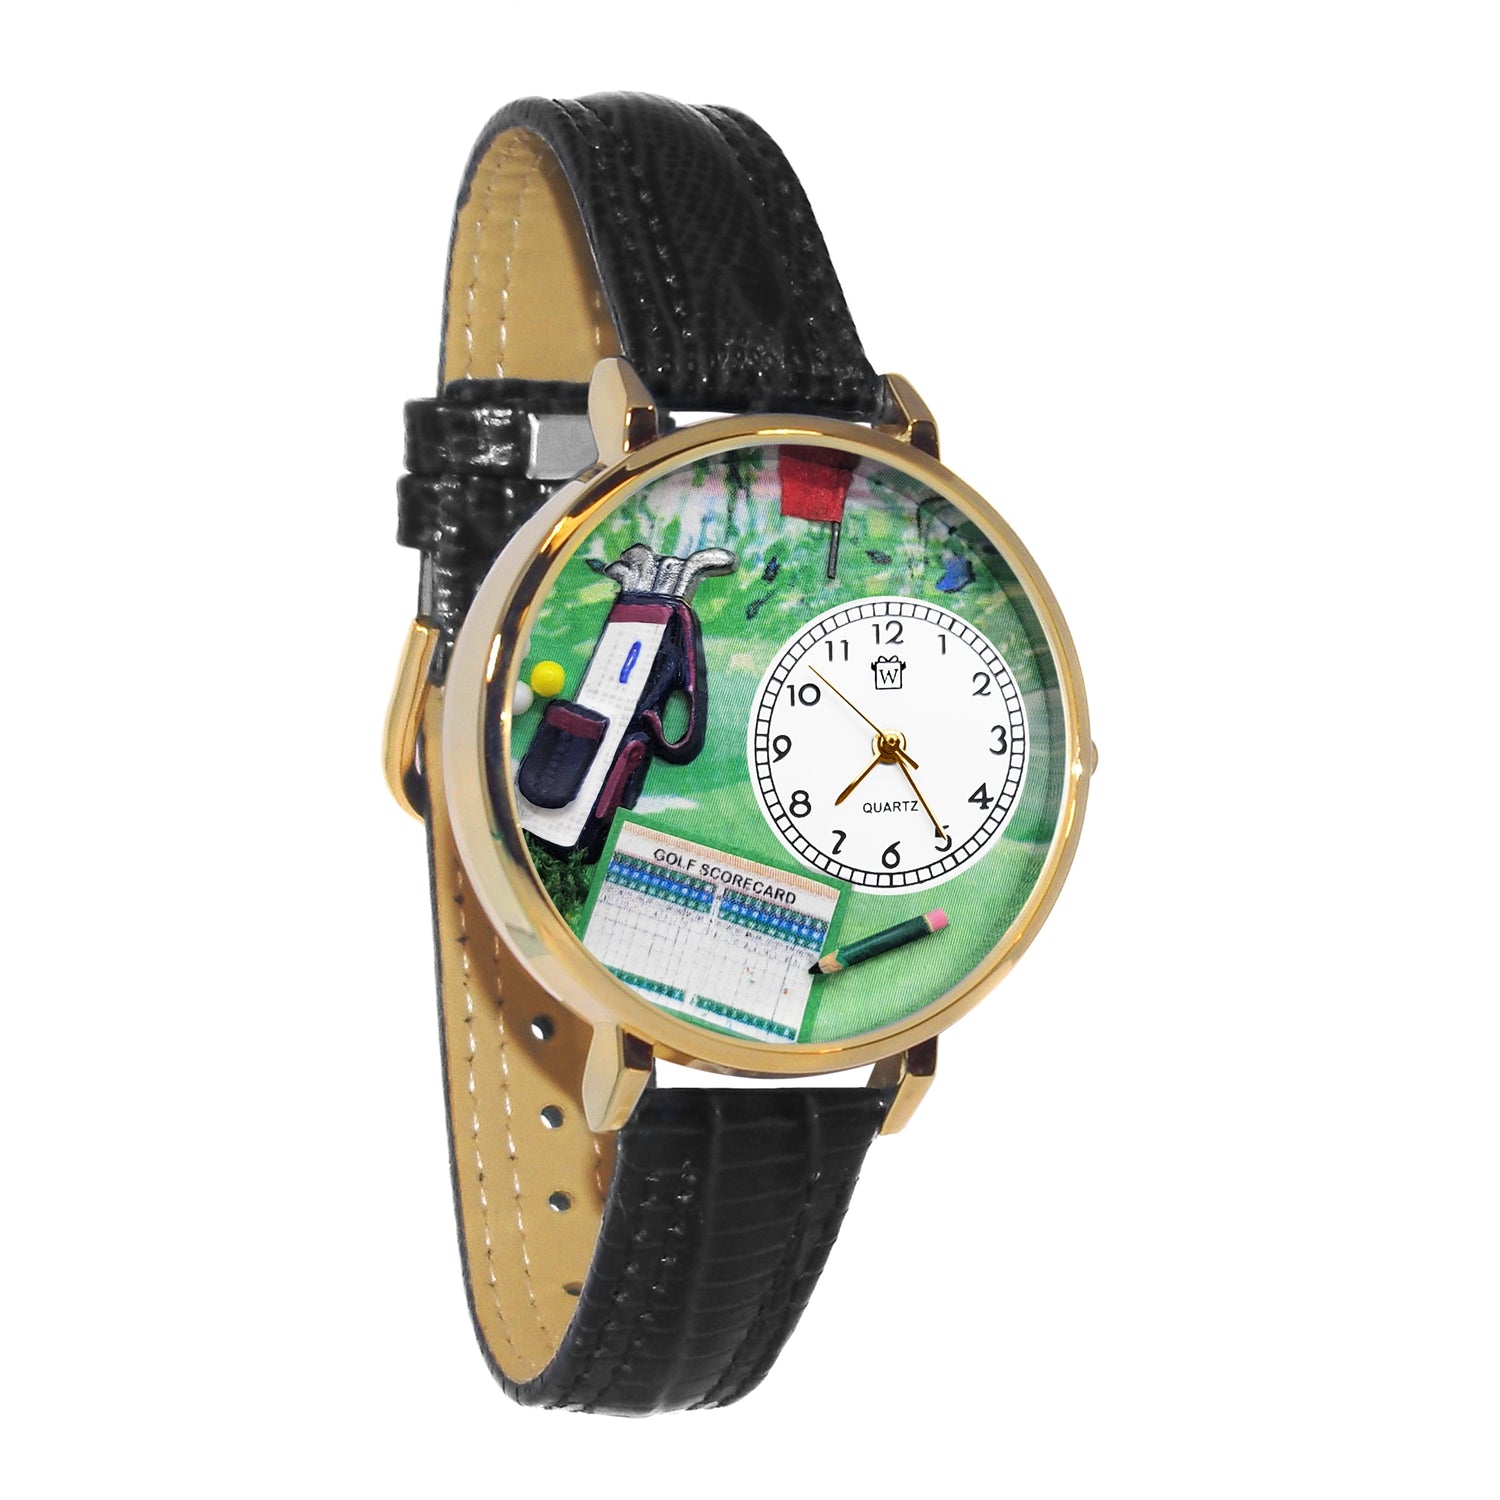 Whimsical Gifts | Golf Bag 3D Watch Large Style | Handmade in USA | Hobbies & Special Interests | Sports | Novelty Unique Fun Miniatures Gift | Gold Finish Black Leather Watch Band